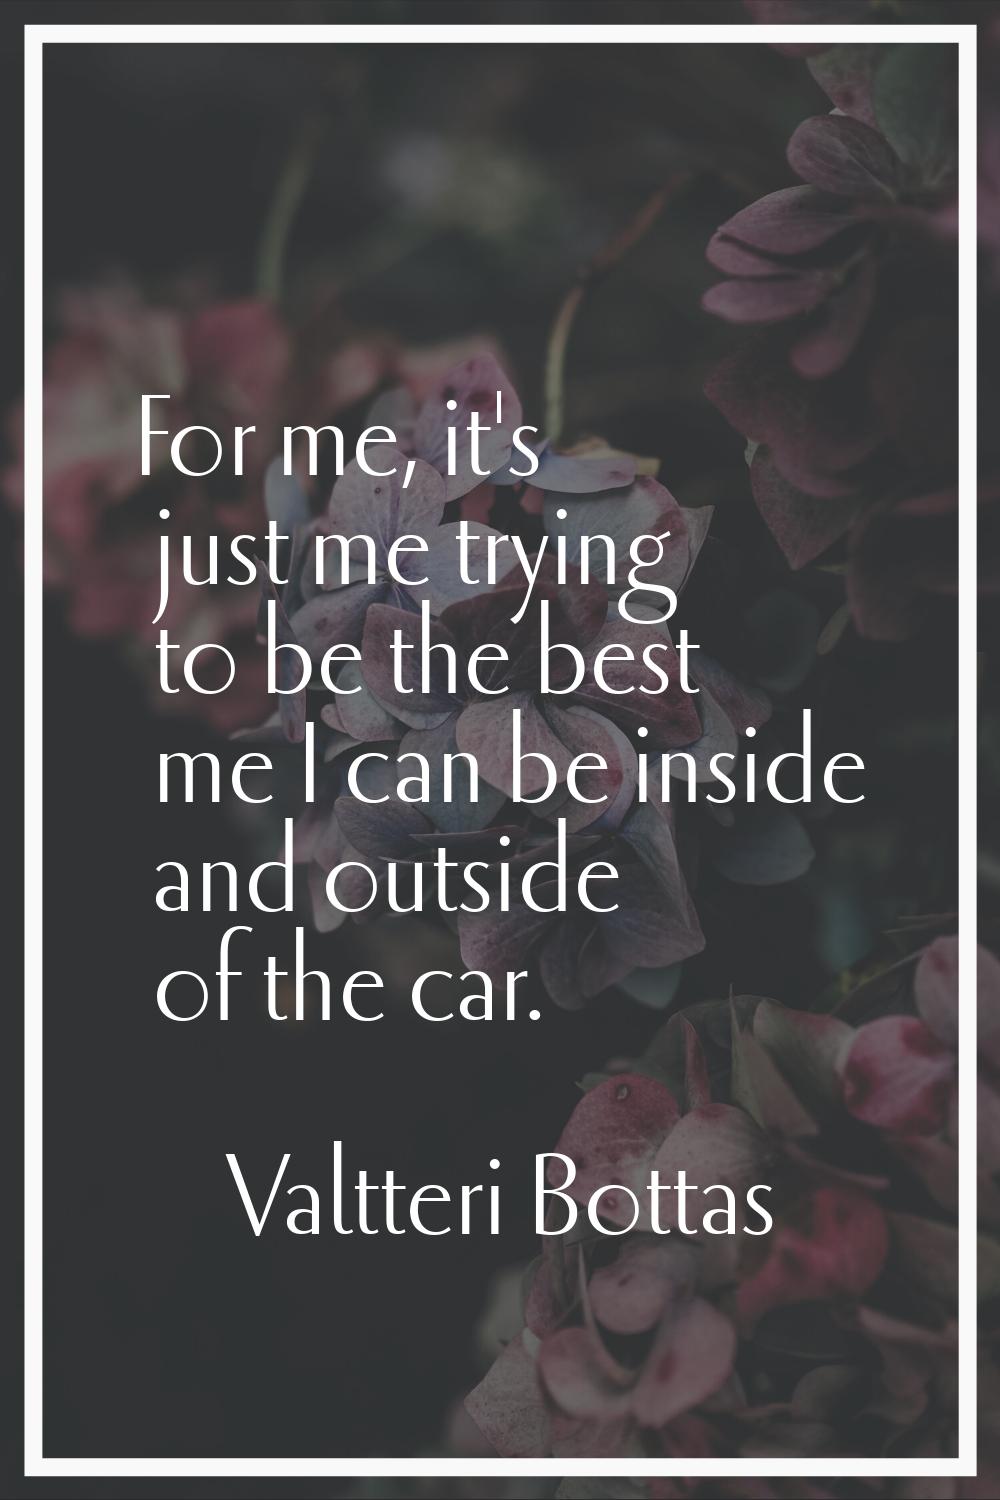 For me, it's just me trying to be the best me I can be inside and outside of the car.